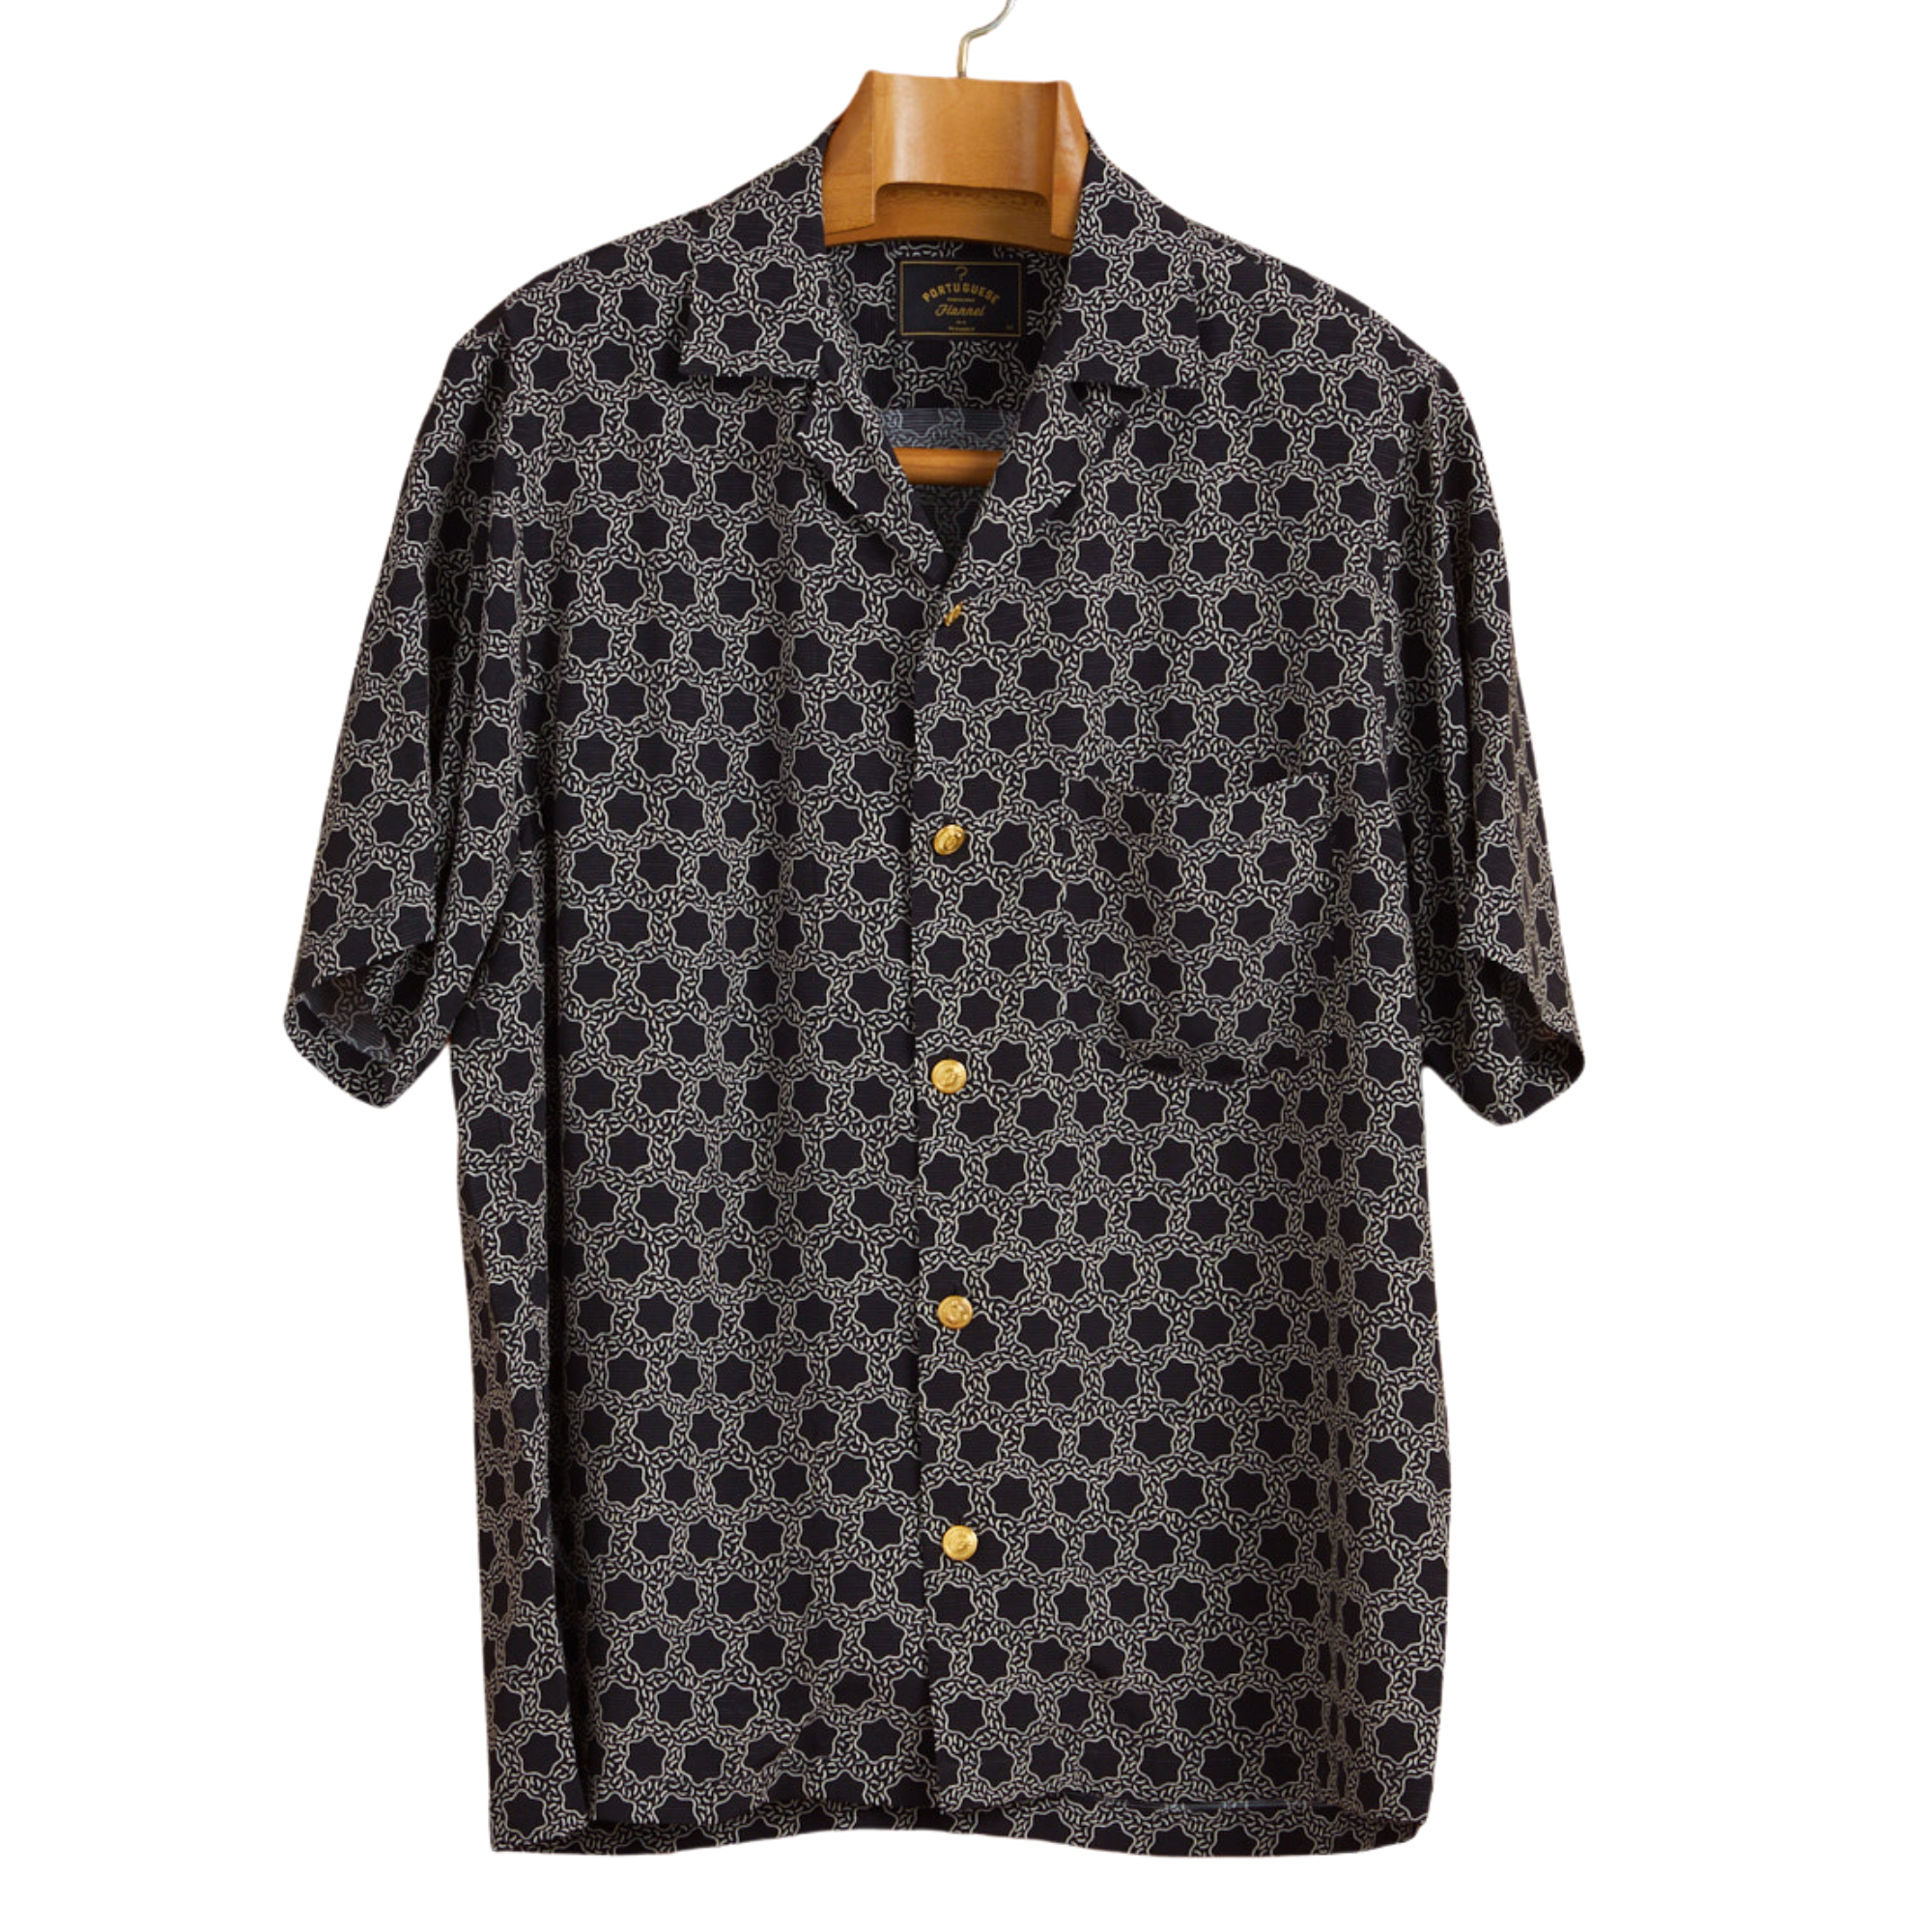 Portuguese Flannel Select Shirt in Black